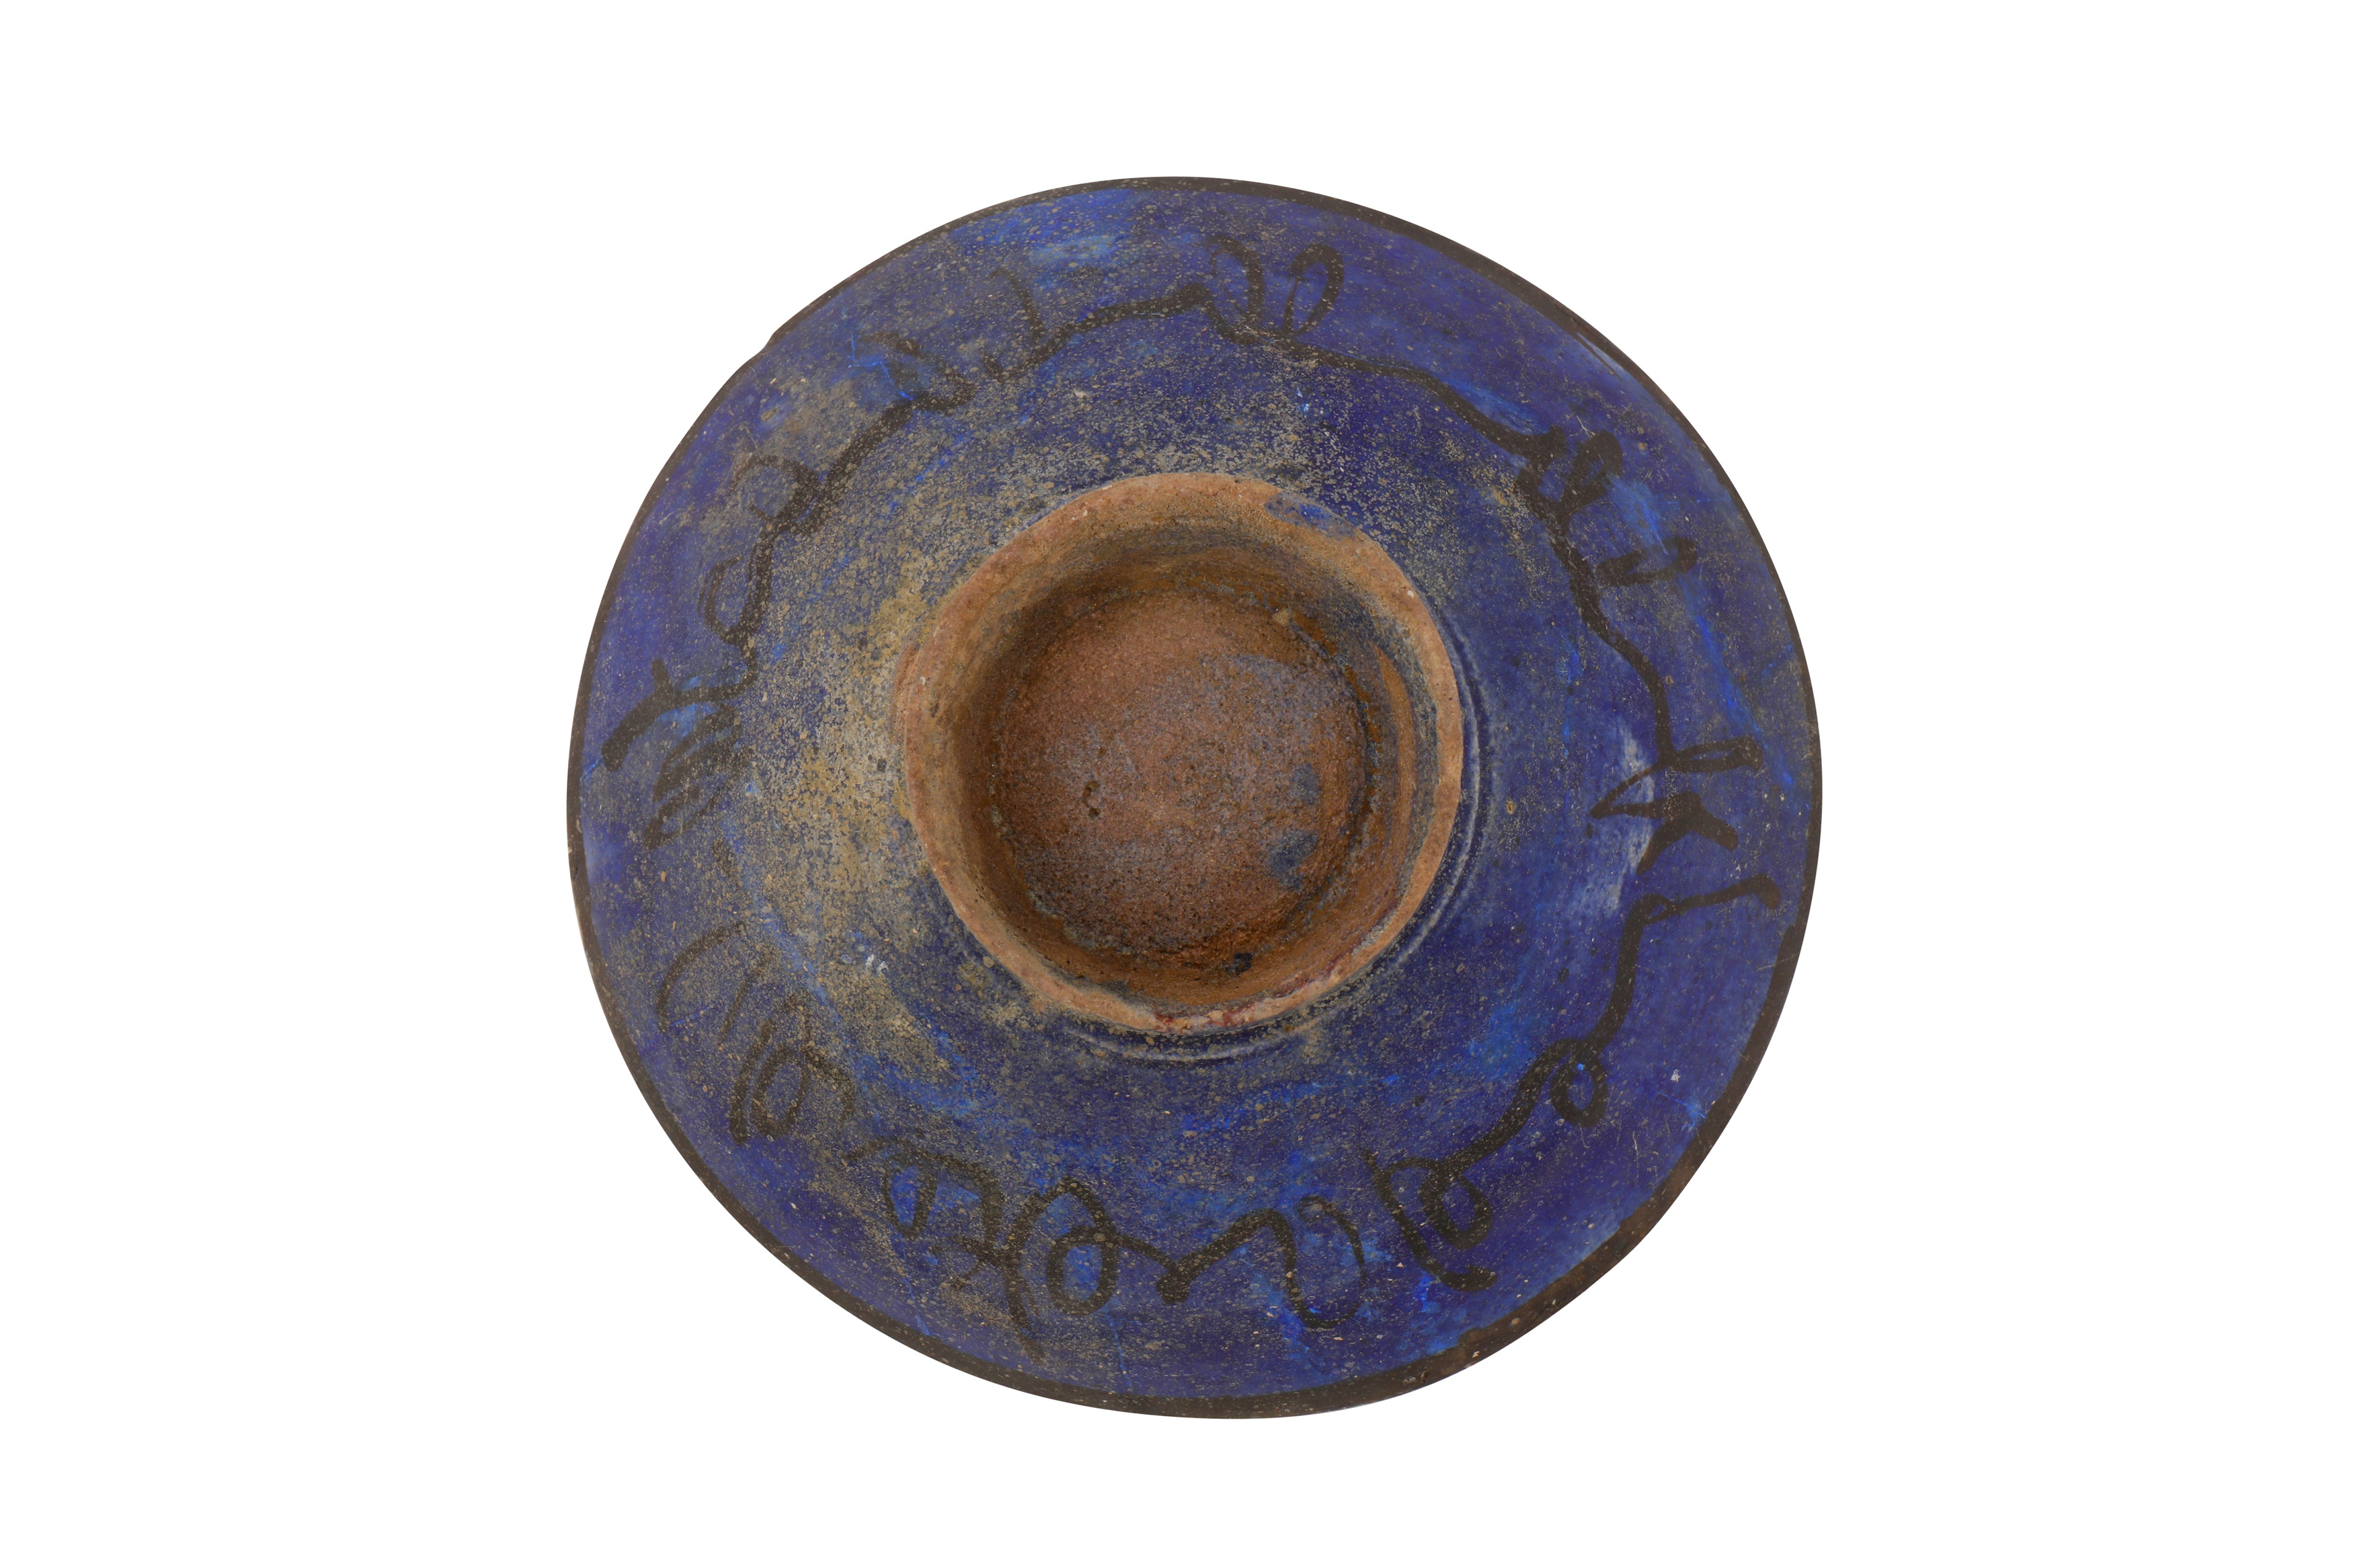 A FINE 13TH CENTURY PERSIAN KASHAN COPPER LUSTRE AND COBALT BLUE GLAZED POTTERY BOWL - Image 4 of 4